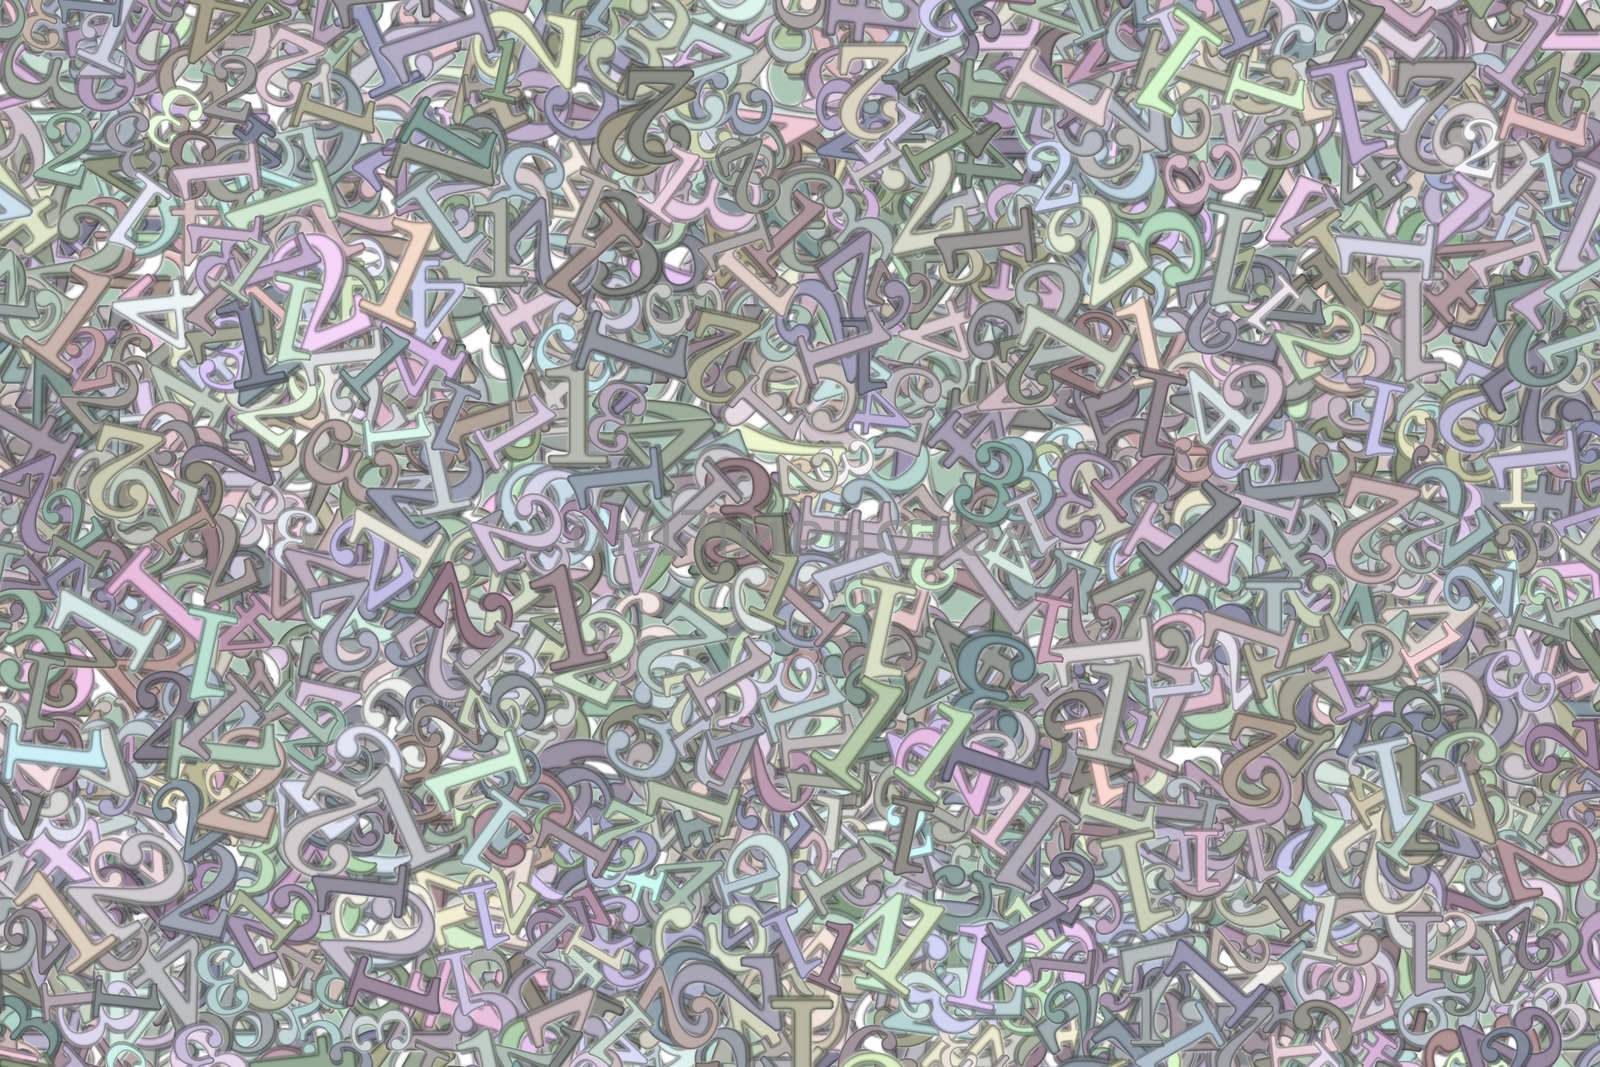 Background of randomly scattered numbers in pastel colors by velislava